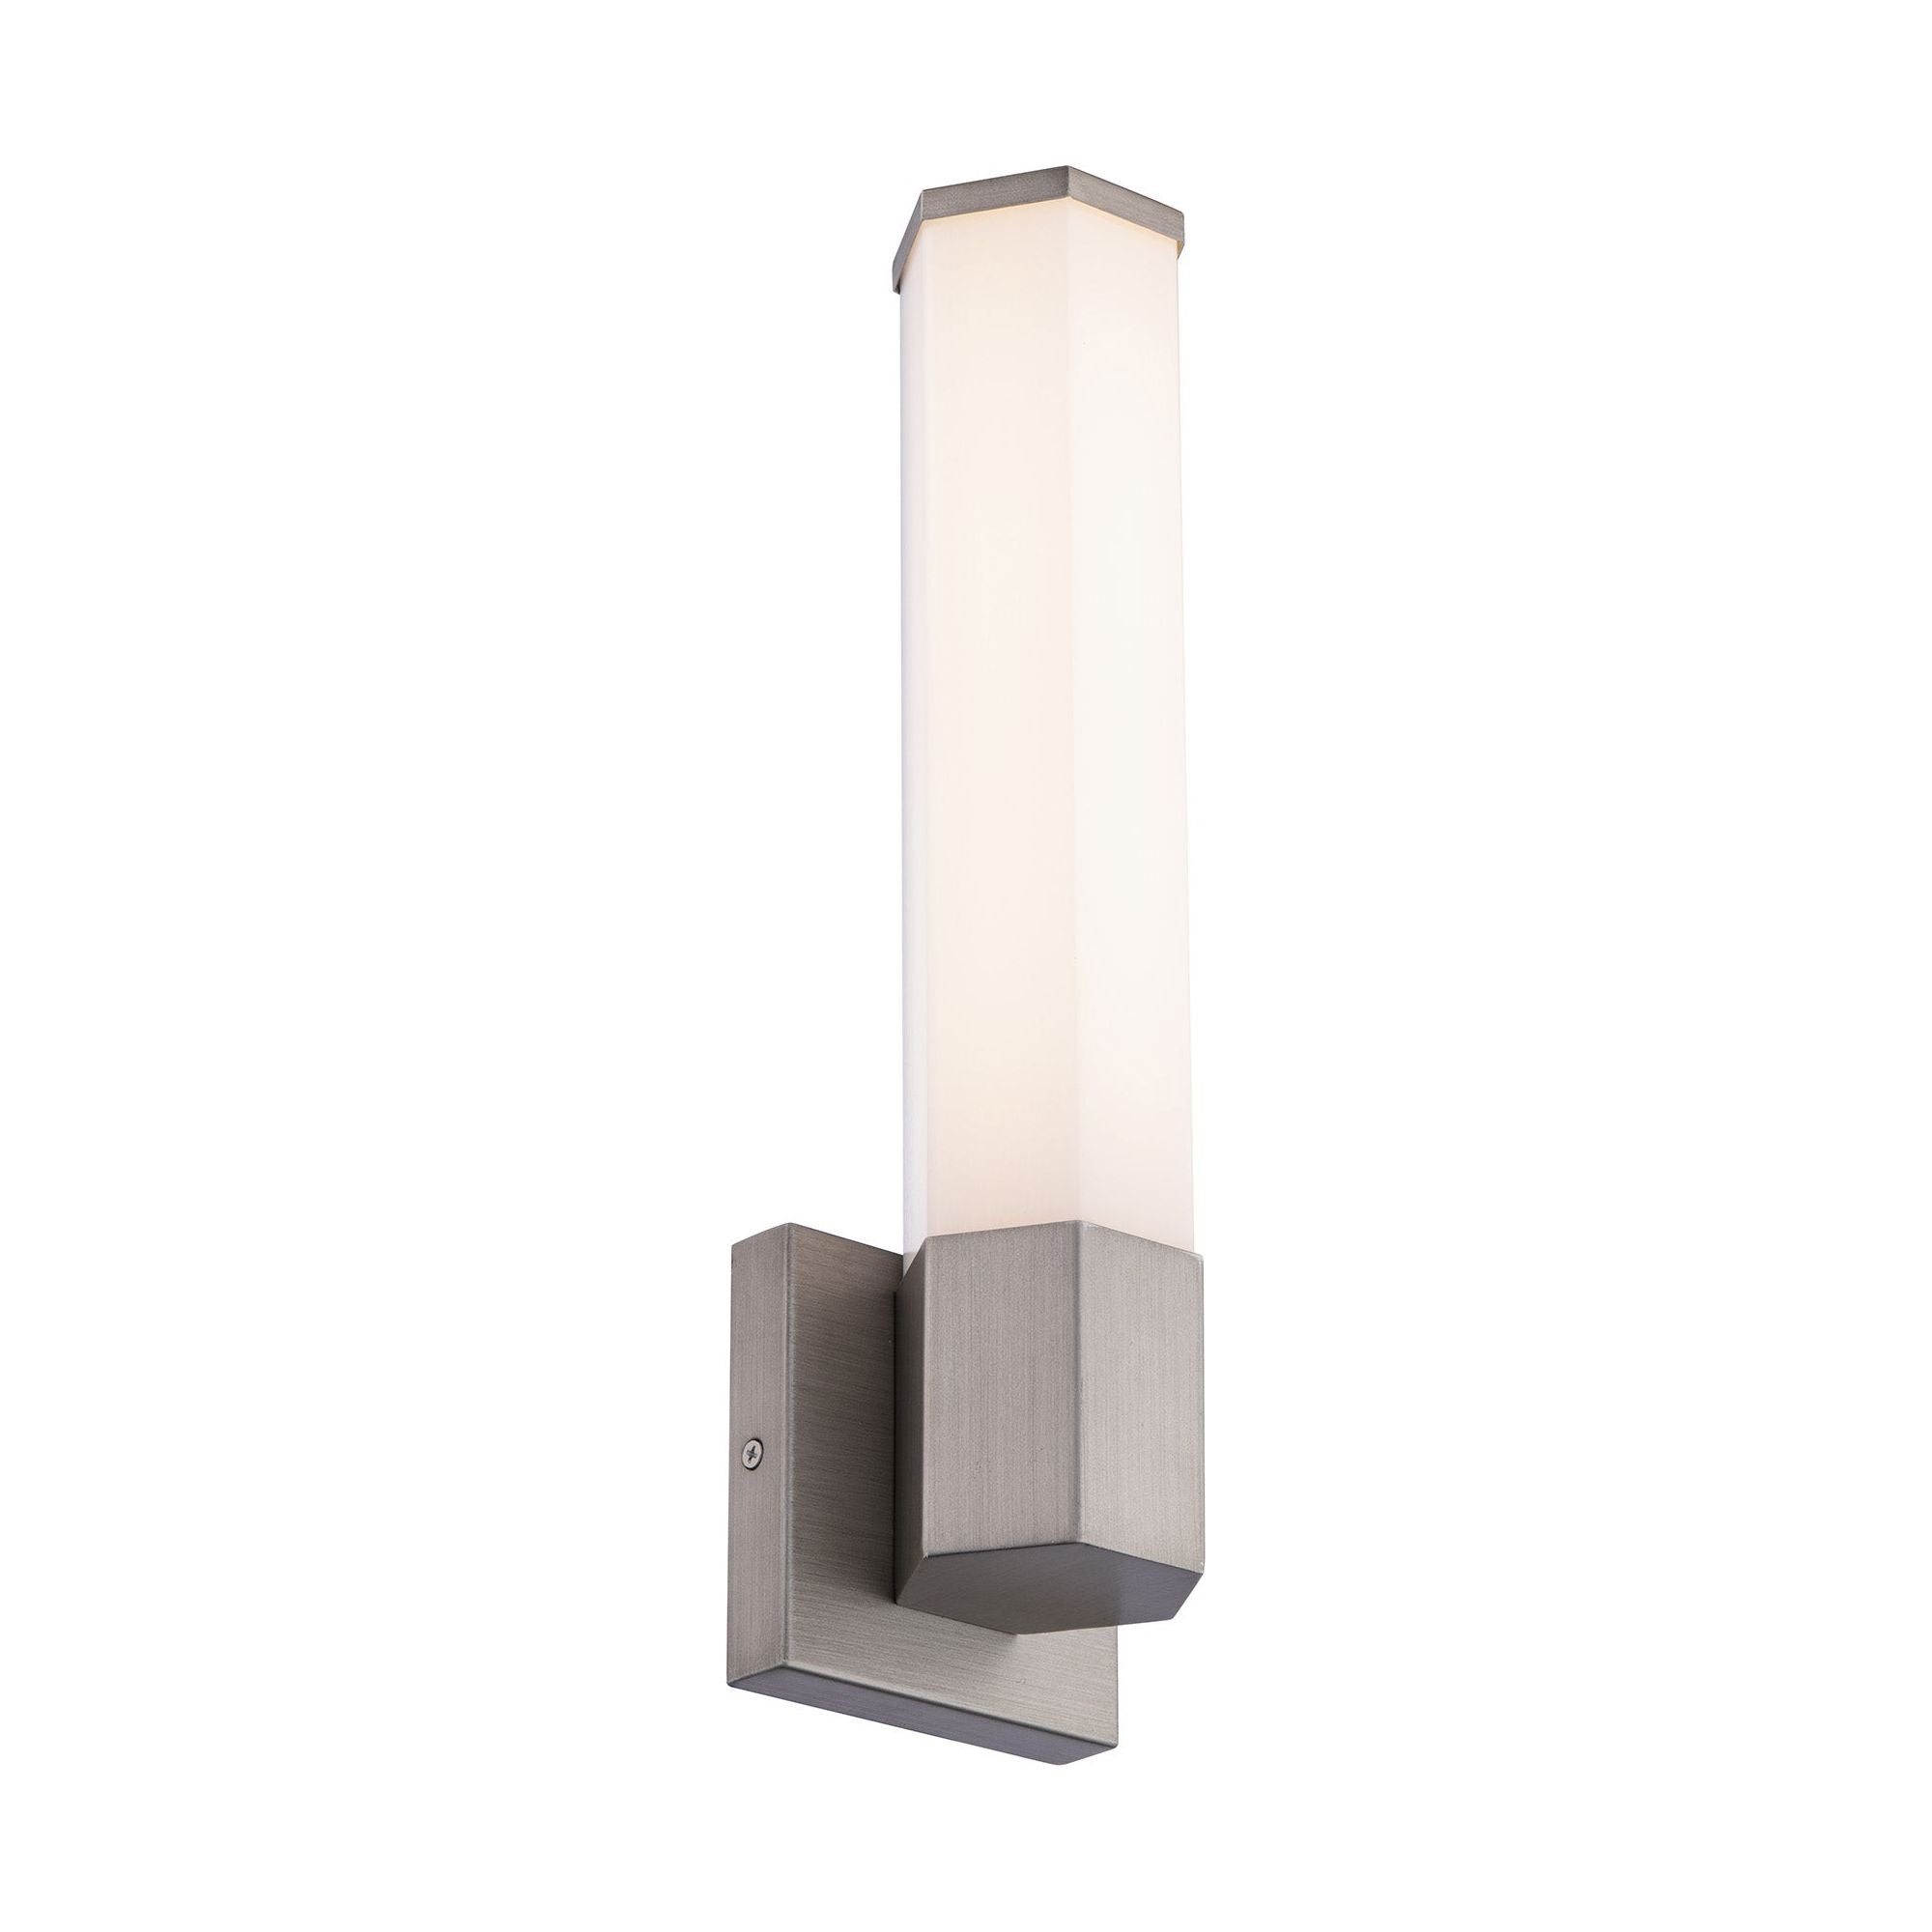 Remi 16" LED Wall Sconce